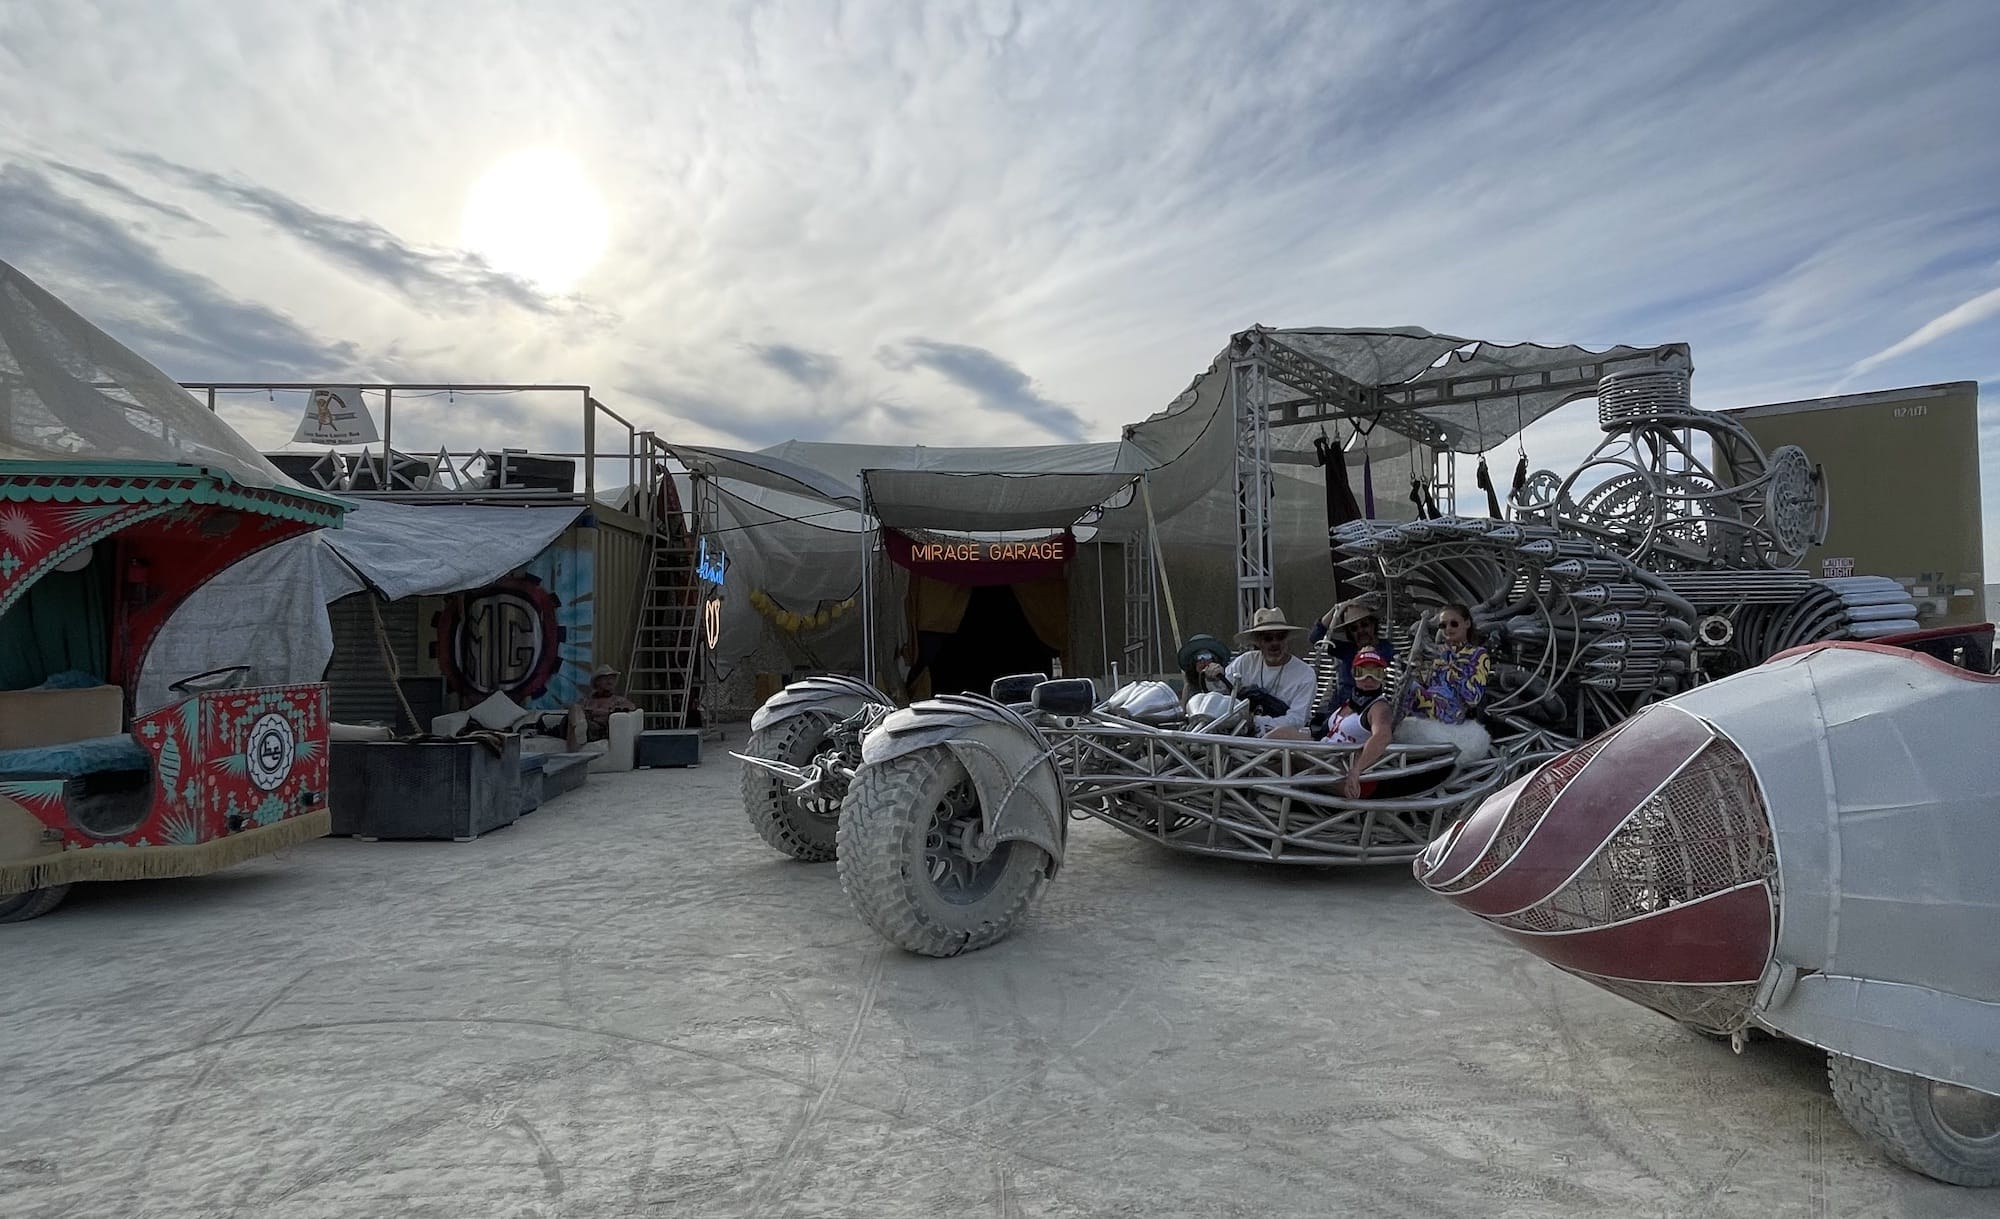 People sit in a dune buggy at Burning Man